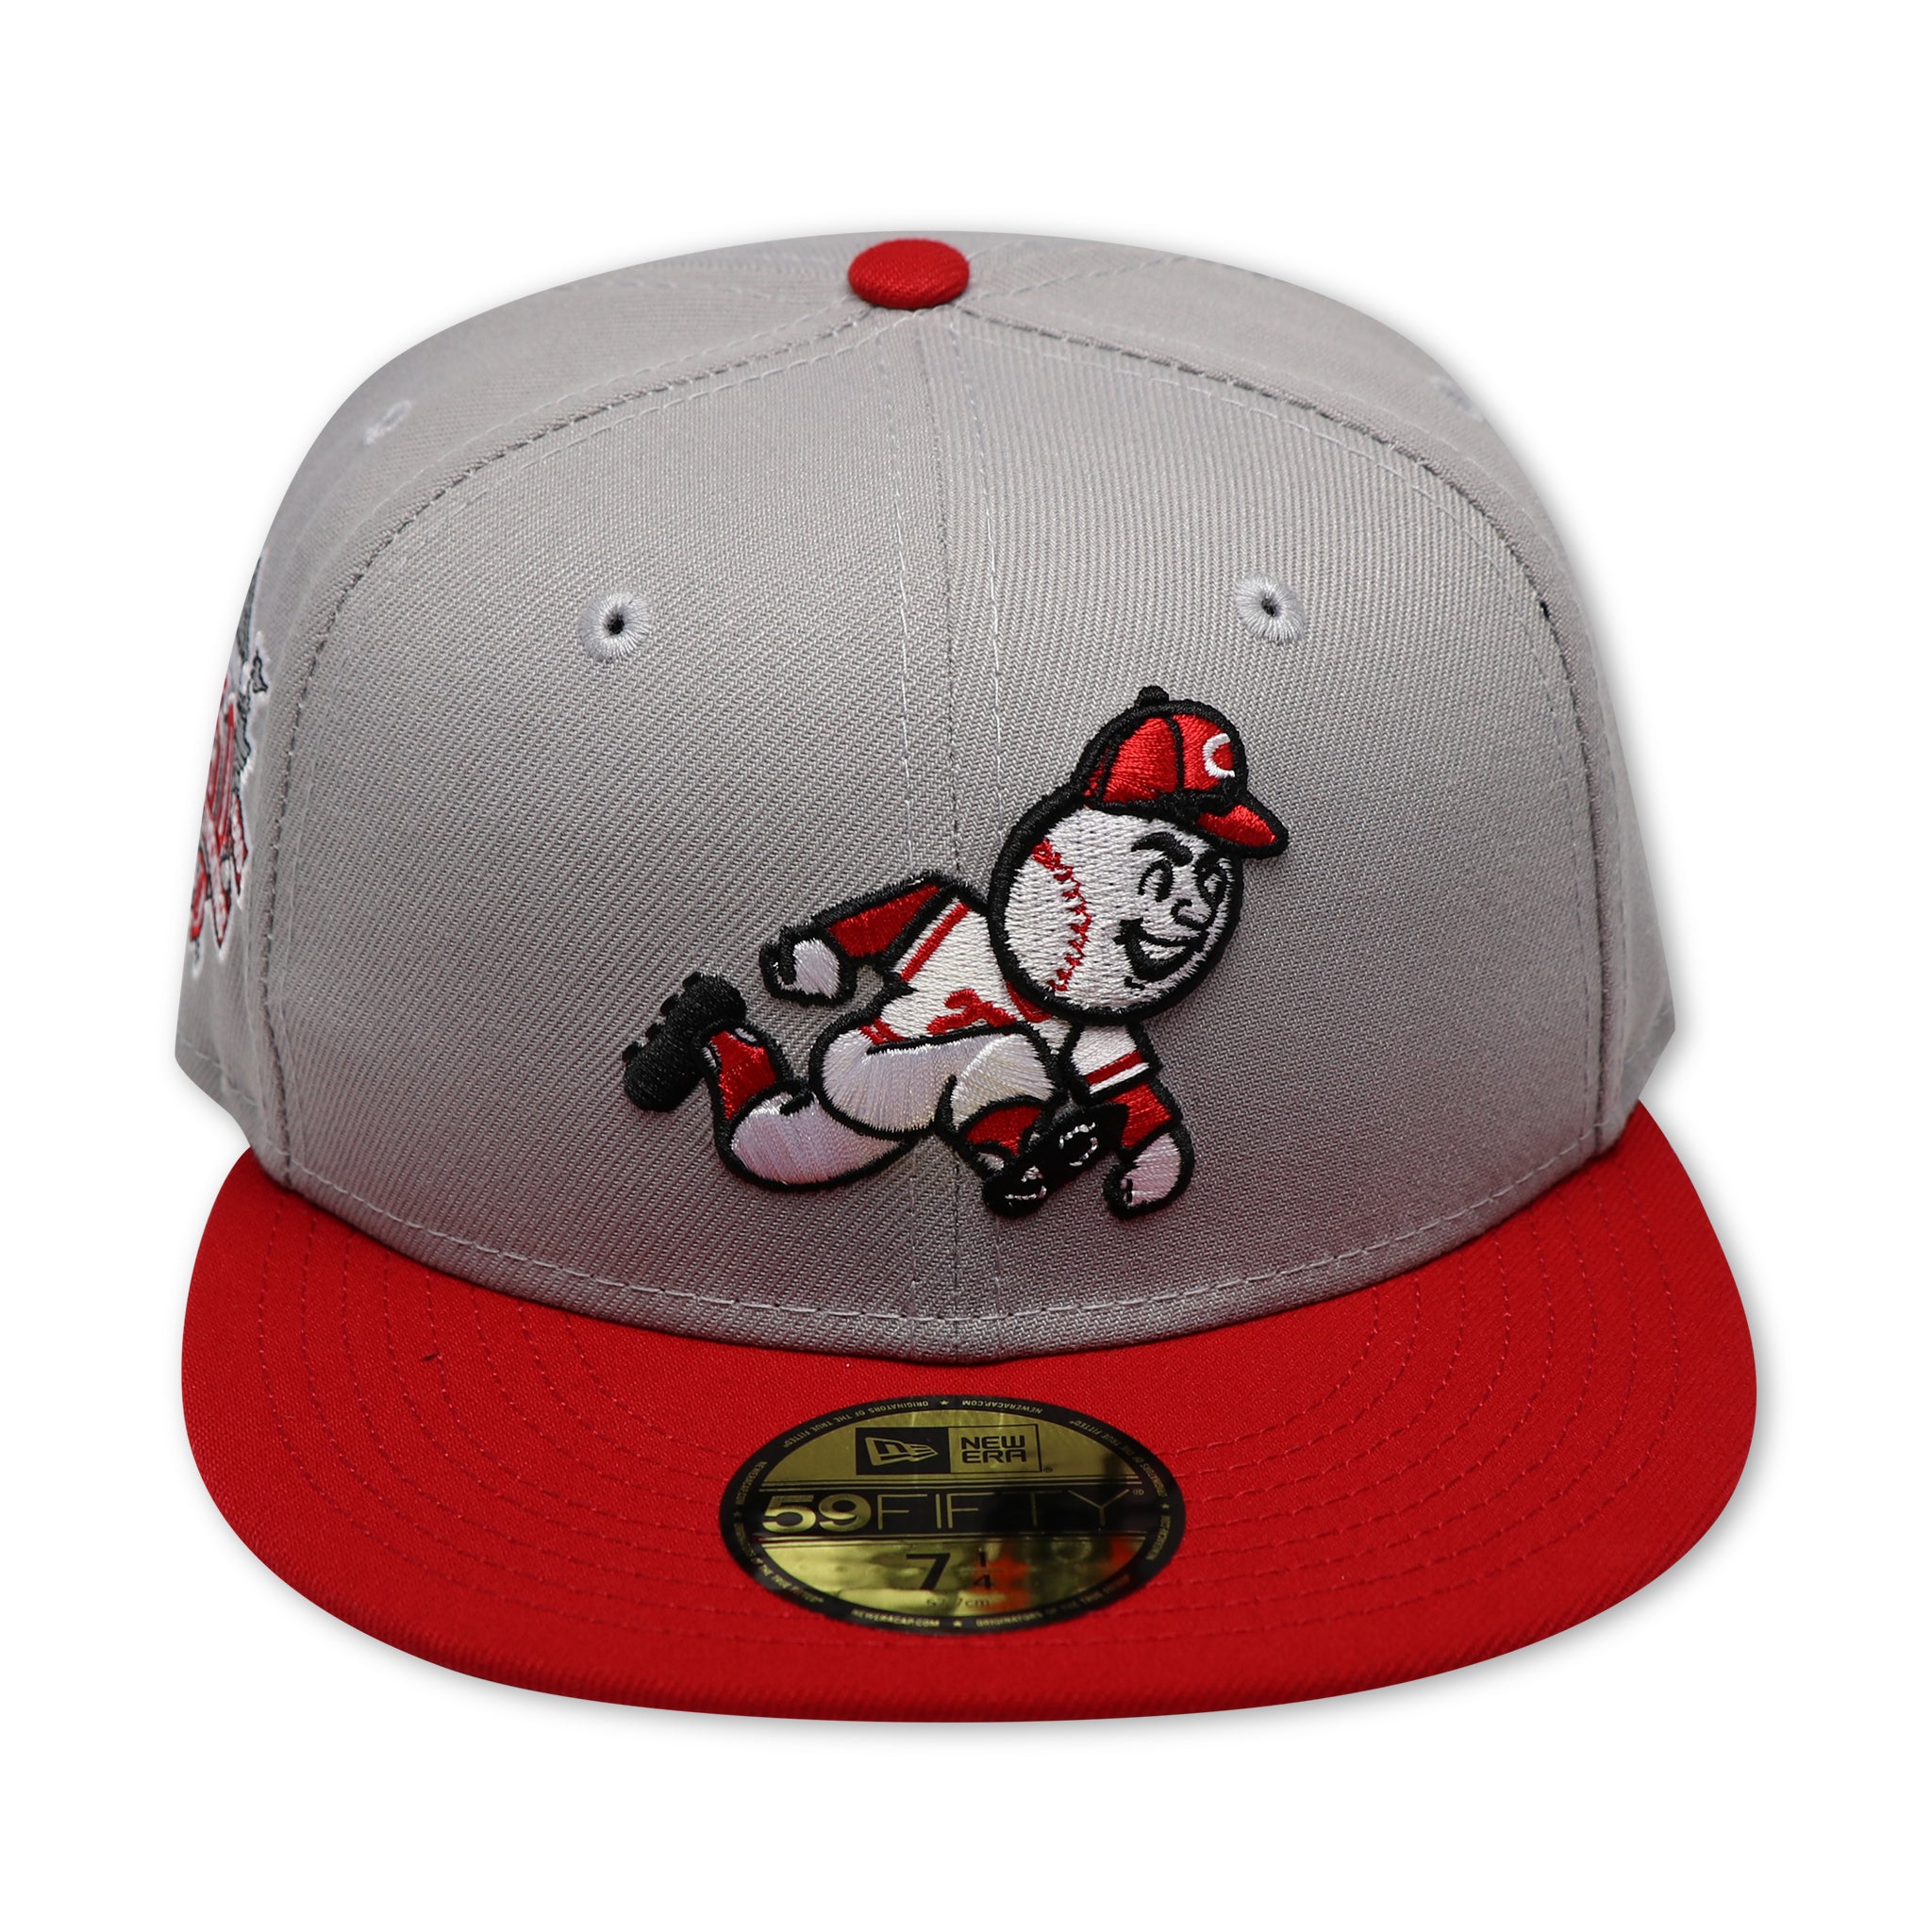 CINCINATTI REDS "ROAD" (150TH ANNIVERSARY) NEW ERA 59FIFTY FITTED (GREEN UNDER VISOR)